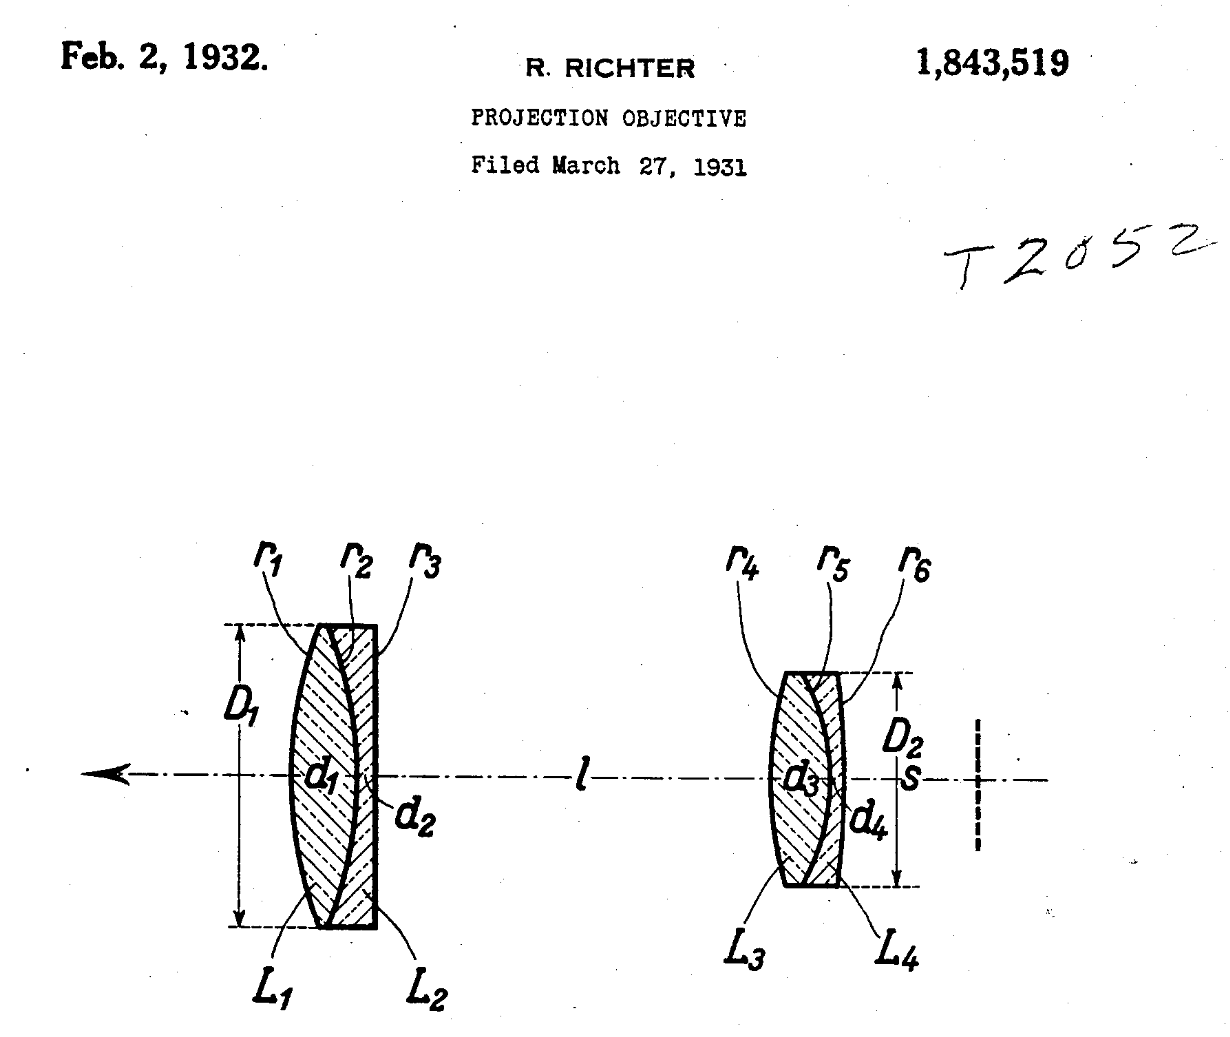 Drawing of the optical design of a projection lens patented by Robert Richter in 1931